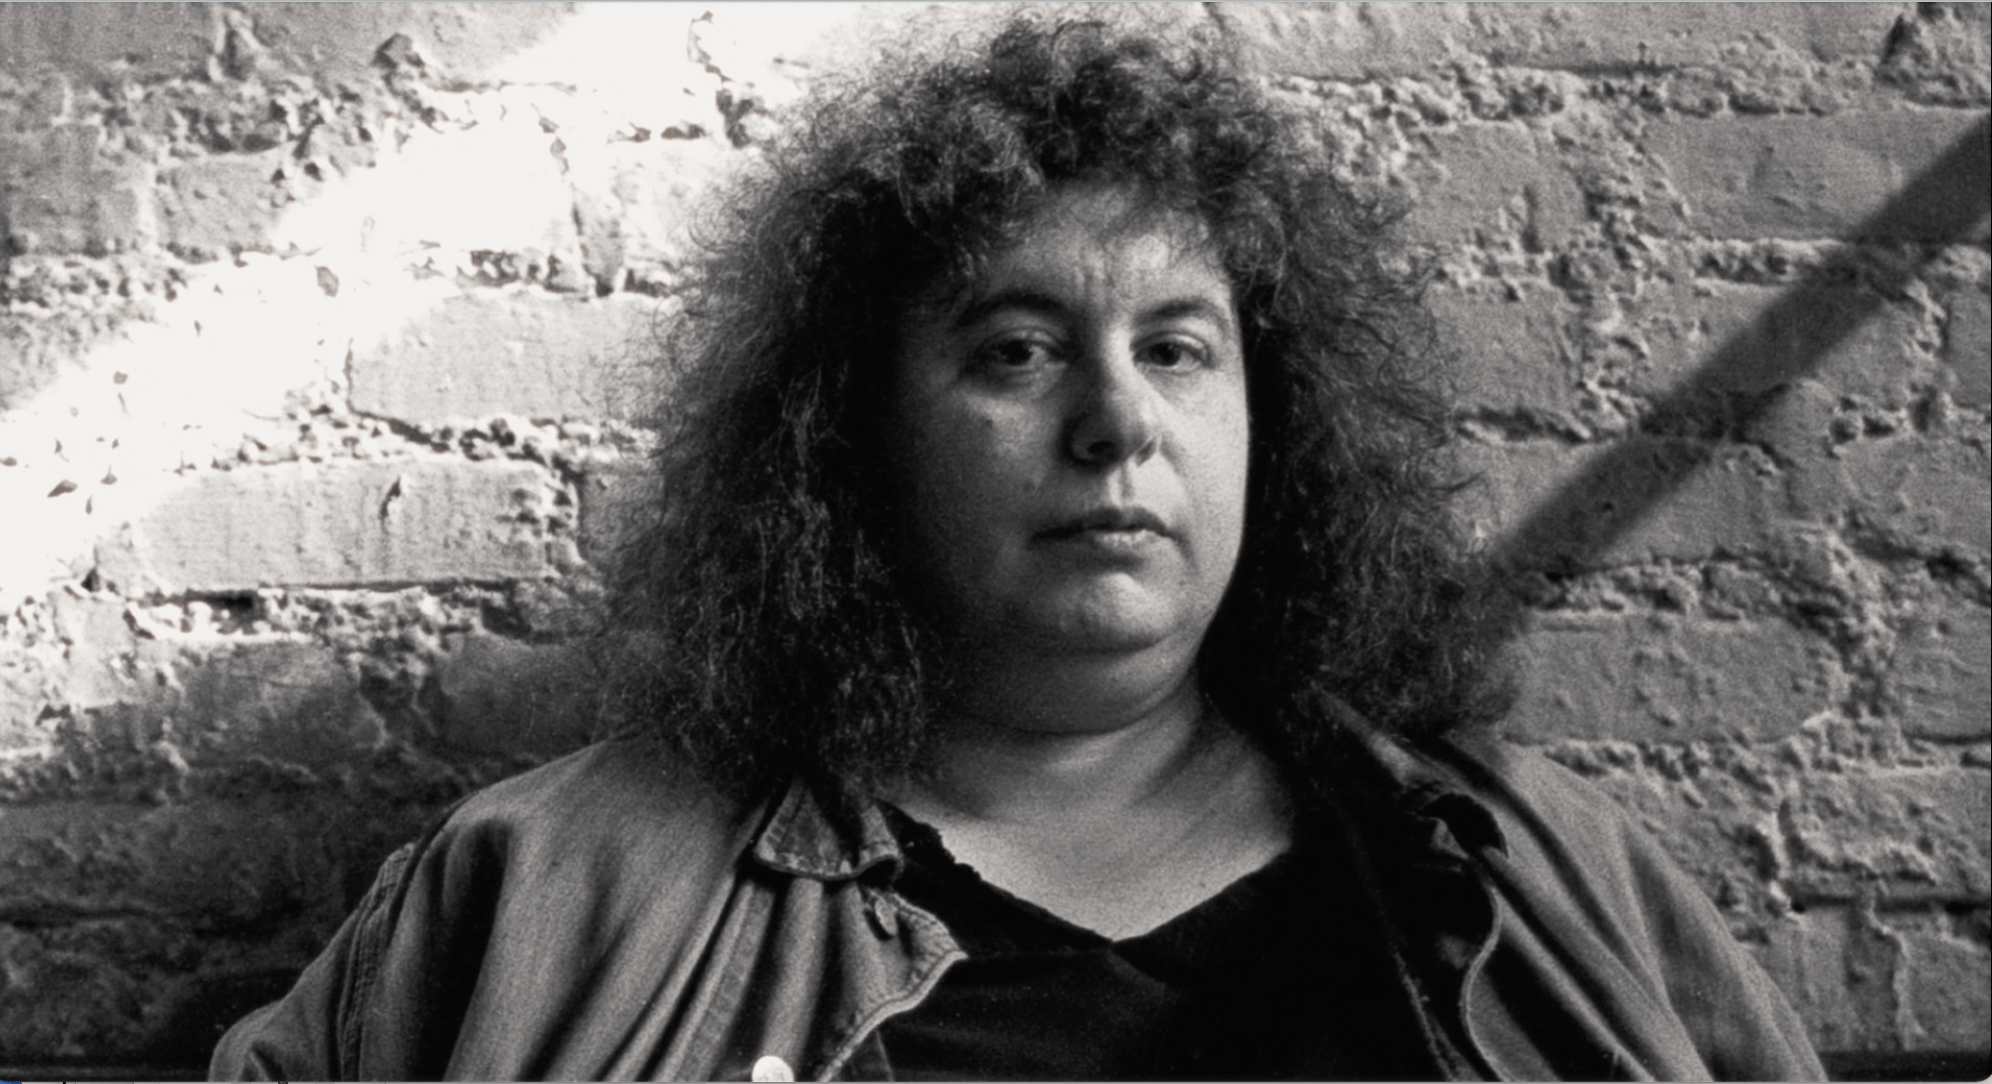 Andrea Dworkin circa 1998, as seen in the documentary film “My Name Is Andrea.”